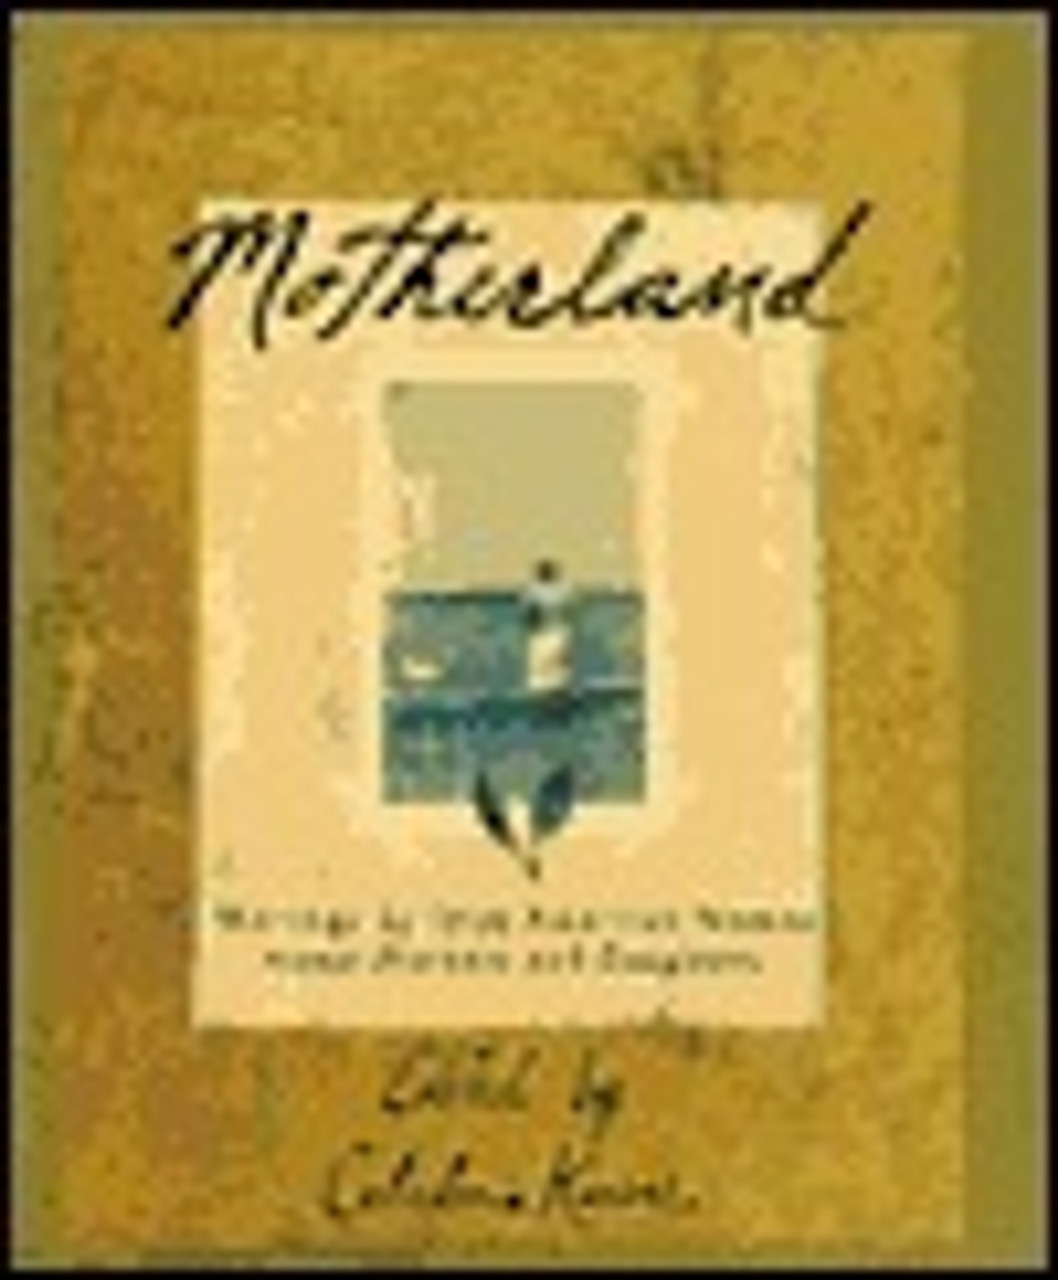 Caledonia Kearns / Motherland: Writings By Irish American Women About Mothers And Daughters (Hardback)